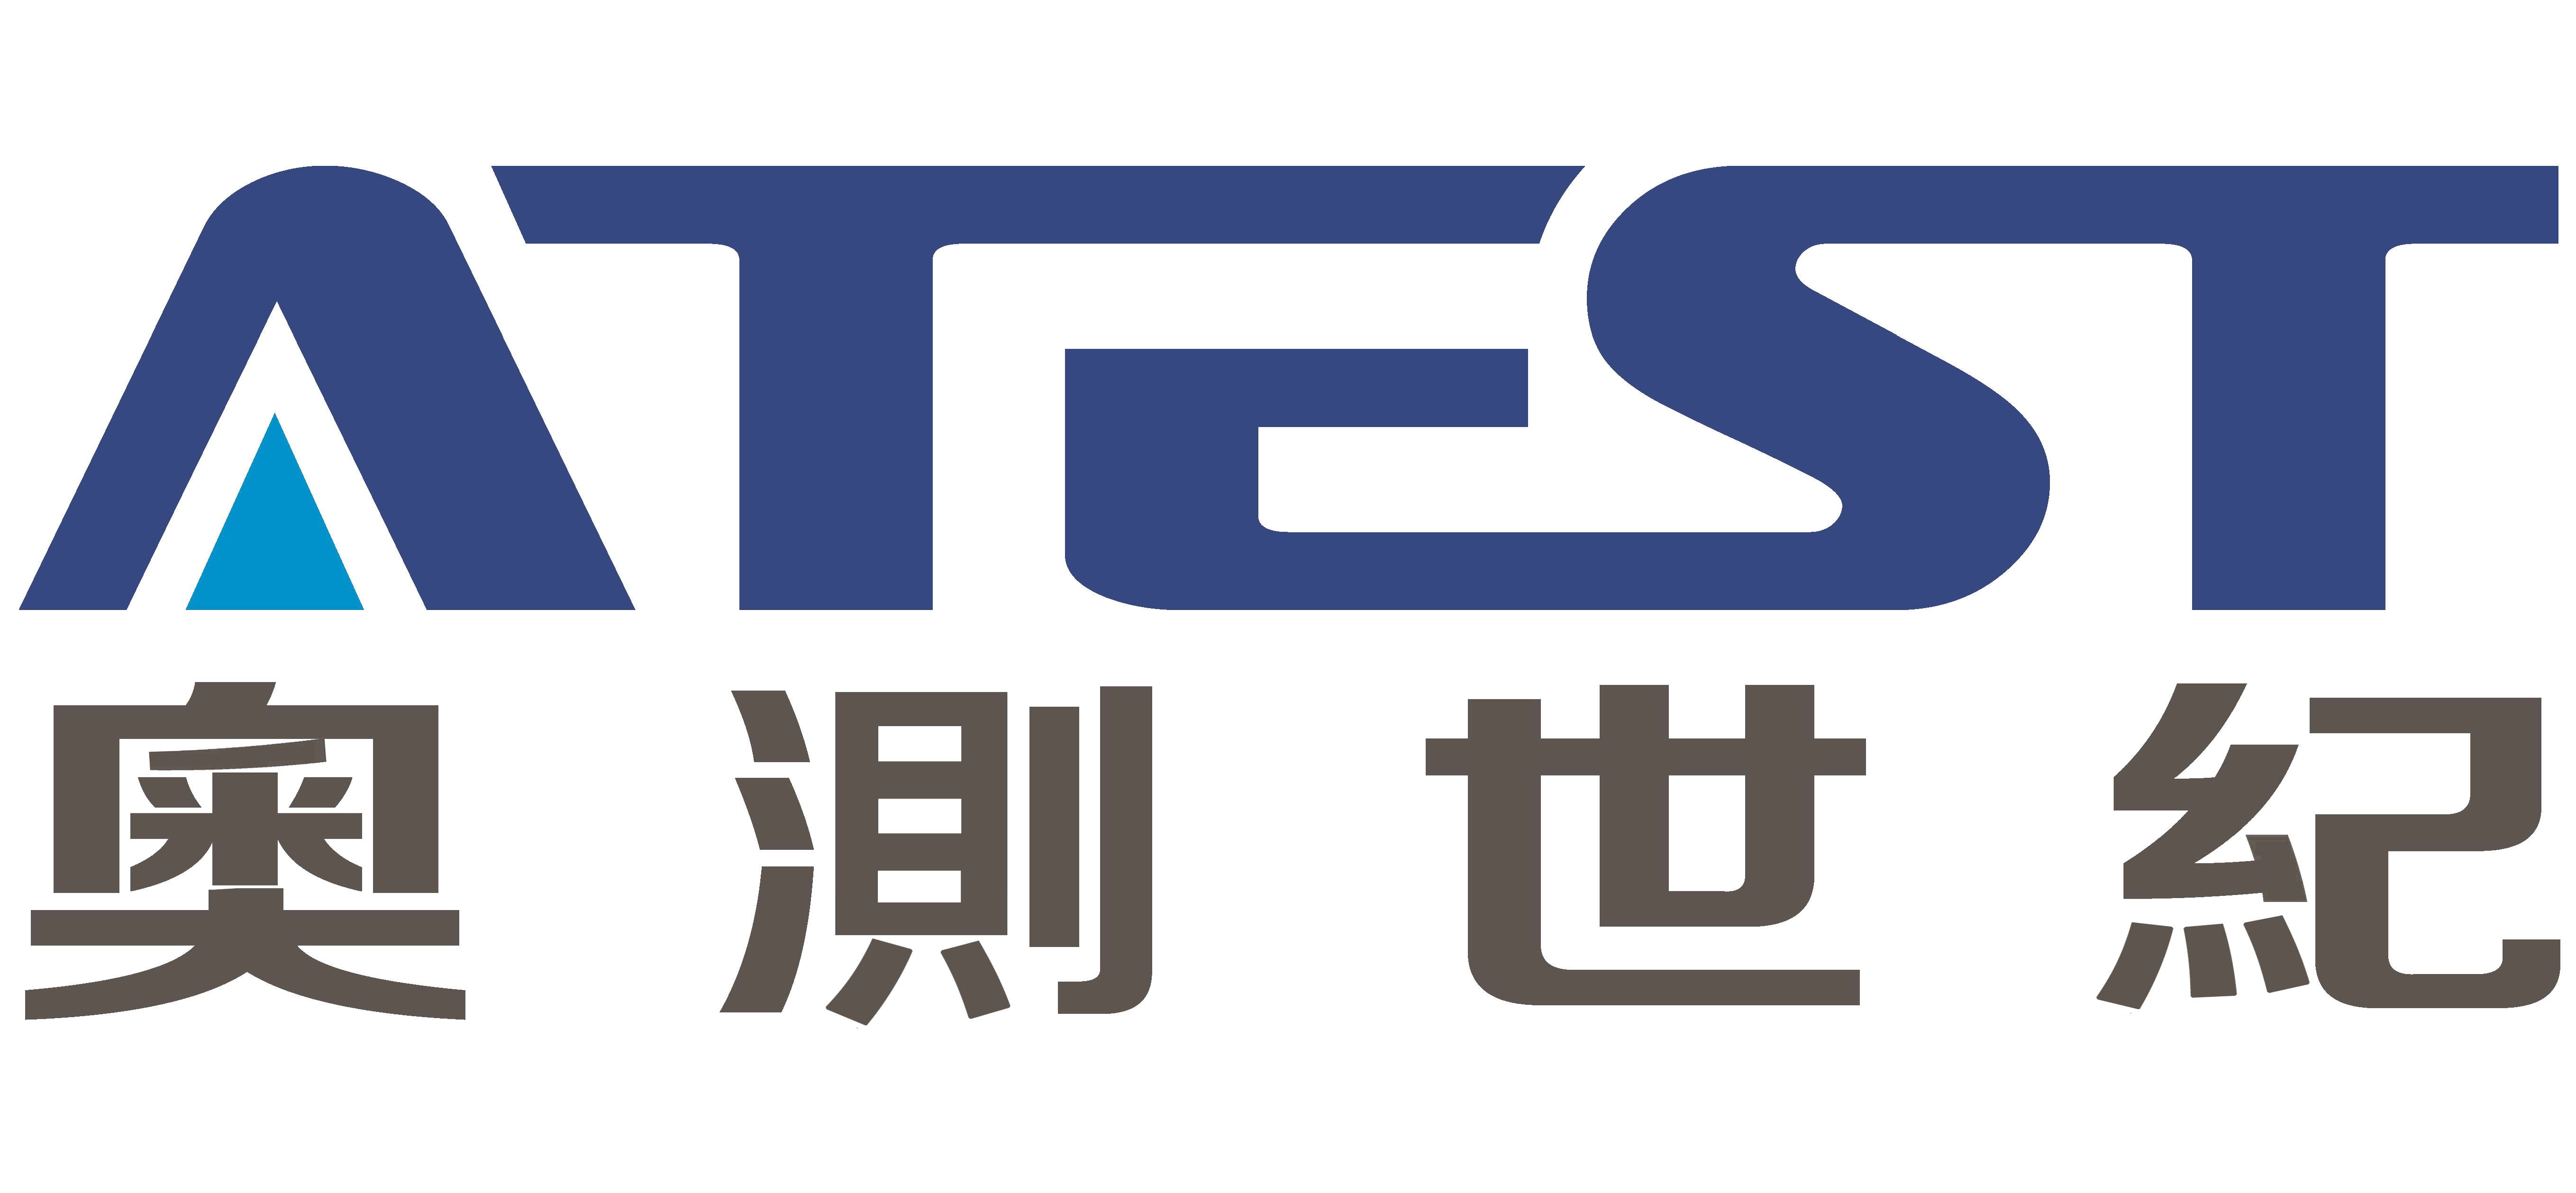 New Journey | A-test Compliance  Services(Taipei) Co., Ltd. was formally established